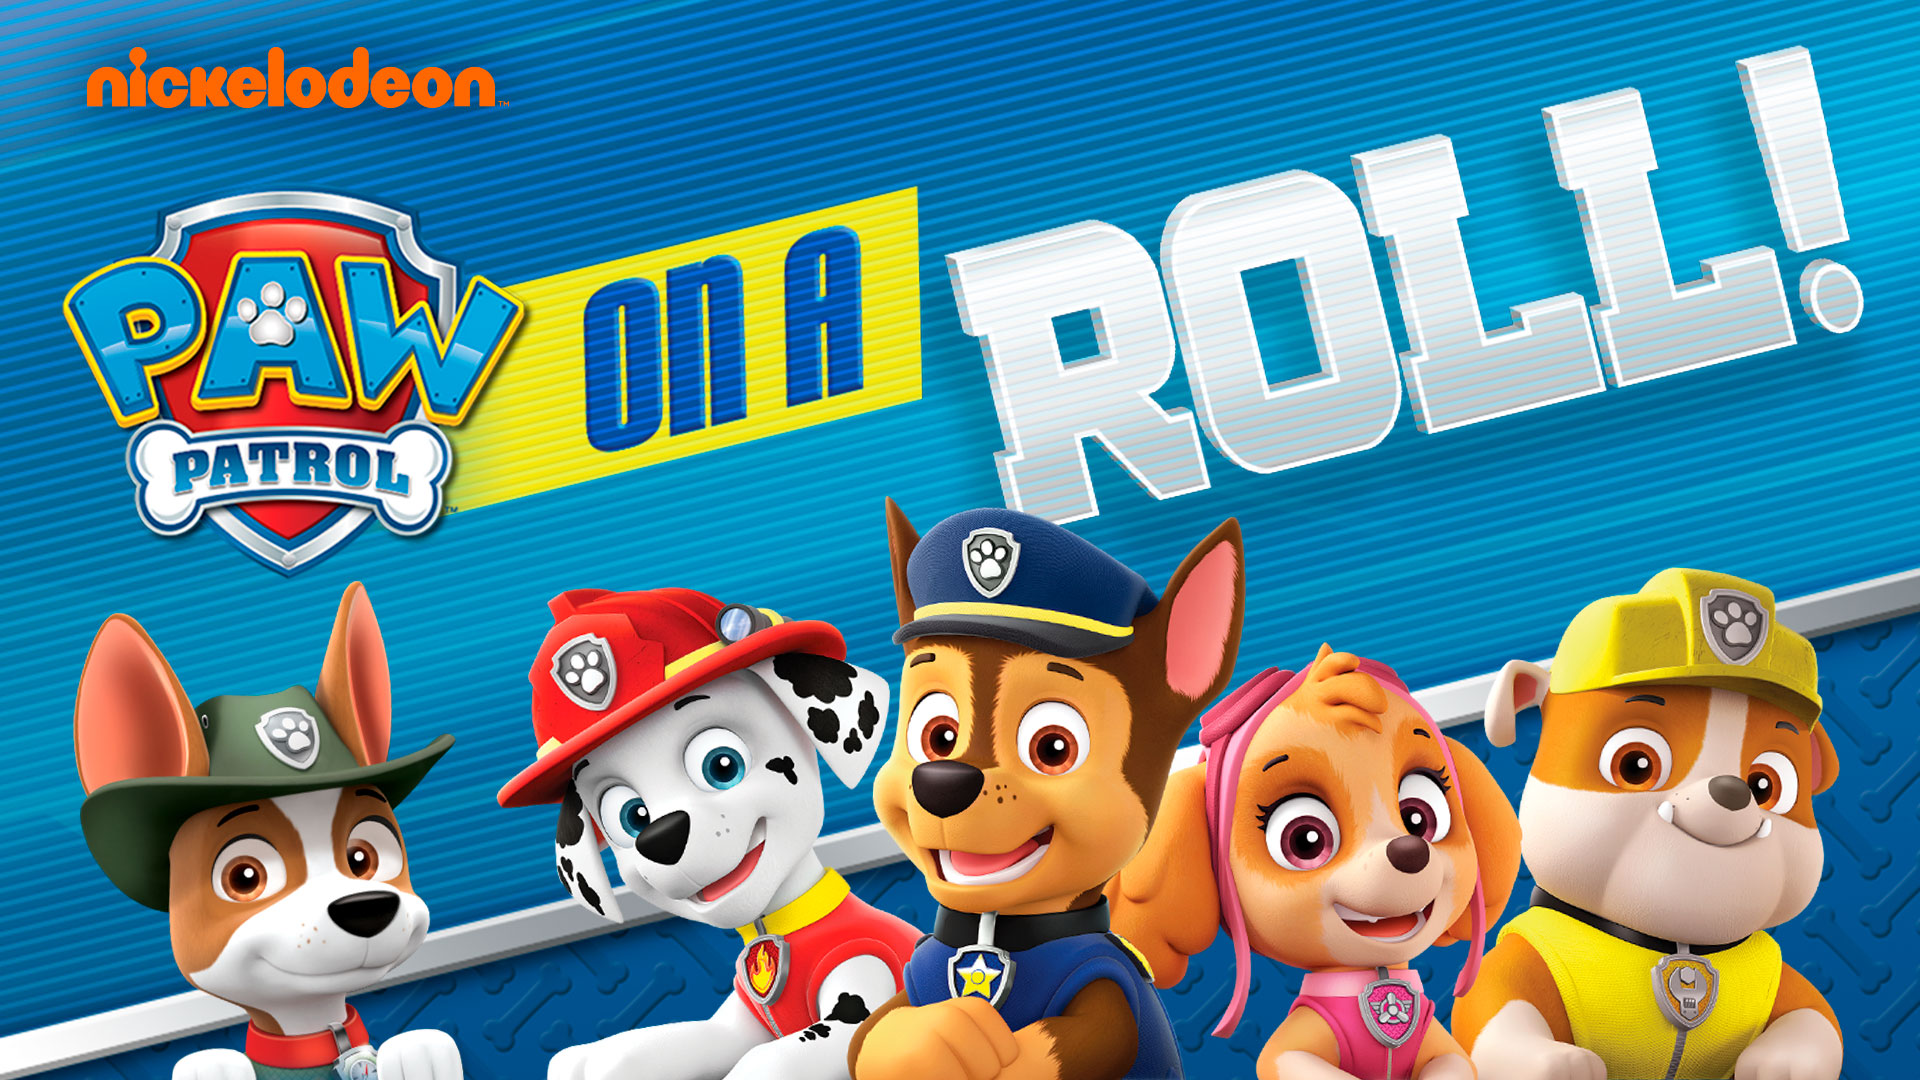 paw patrol on a roll nintendo switch game